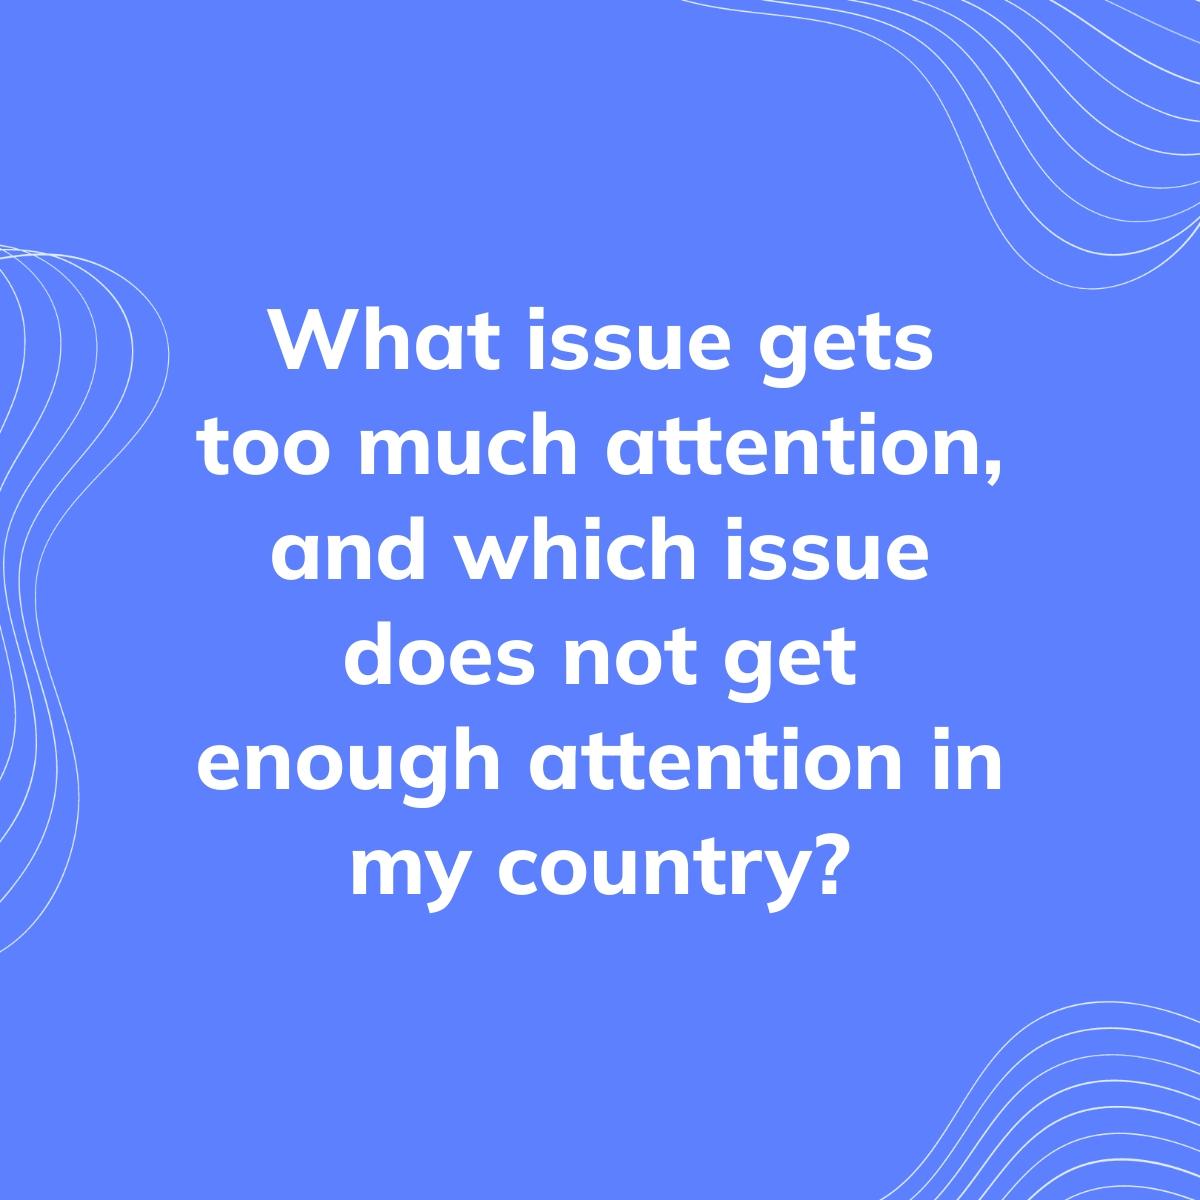 Journal Prompt: What issue gets too much attention, and which issue does not get enough attention in my country?